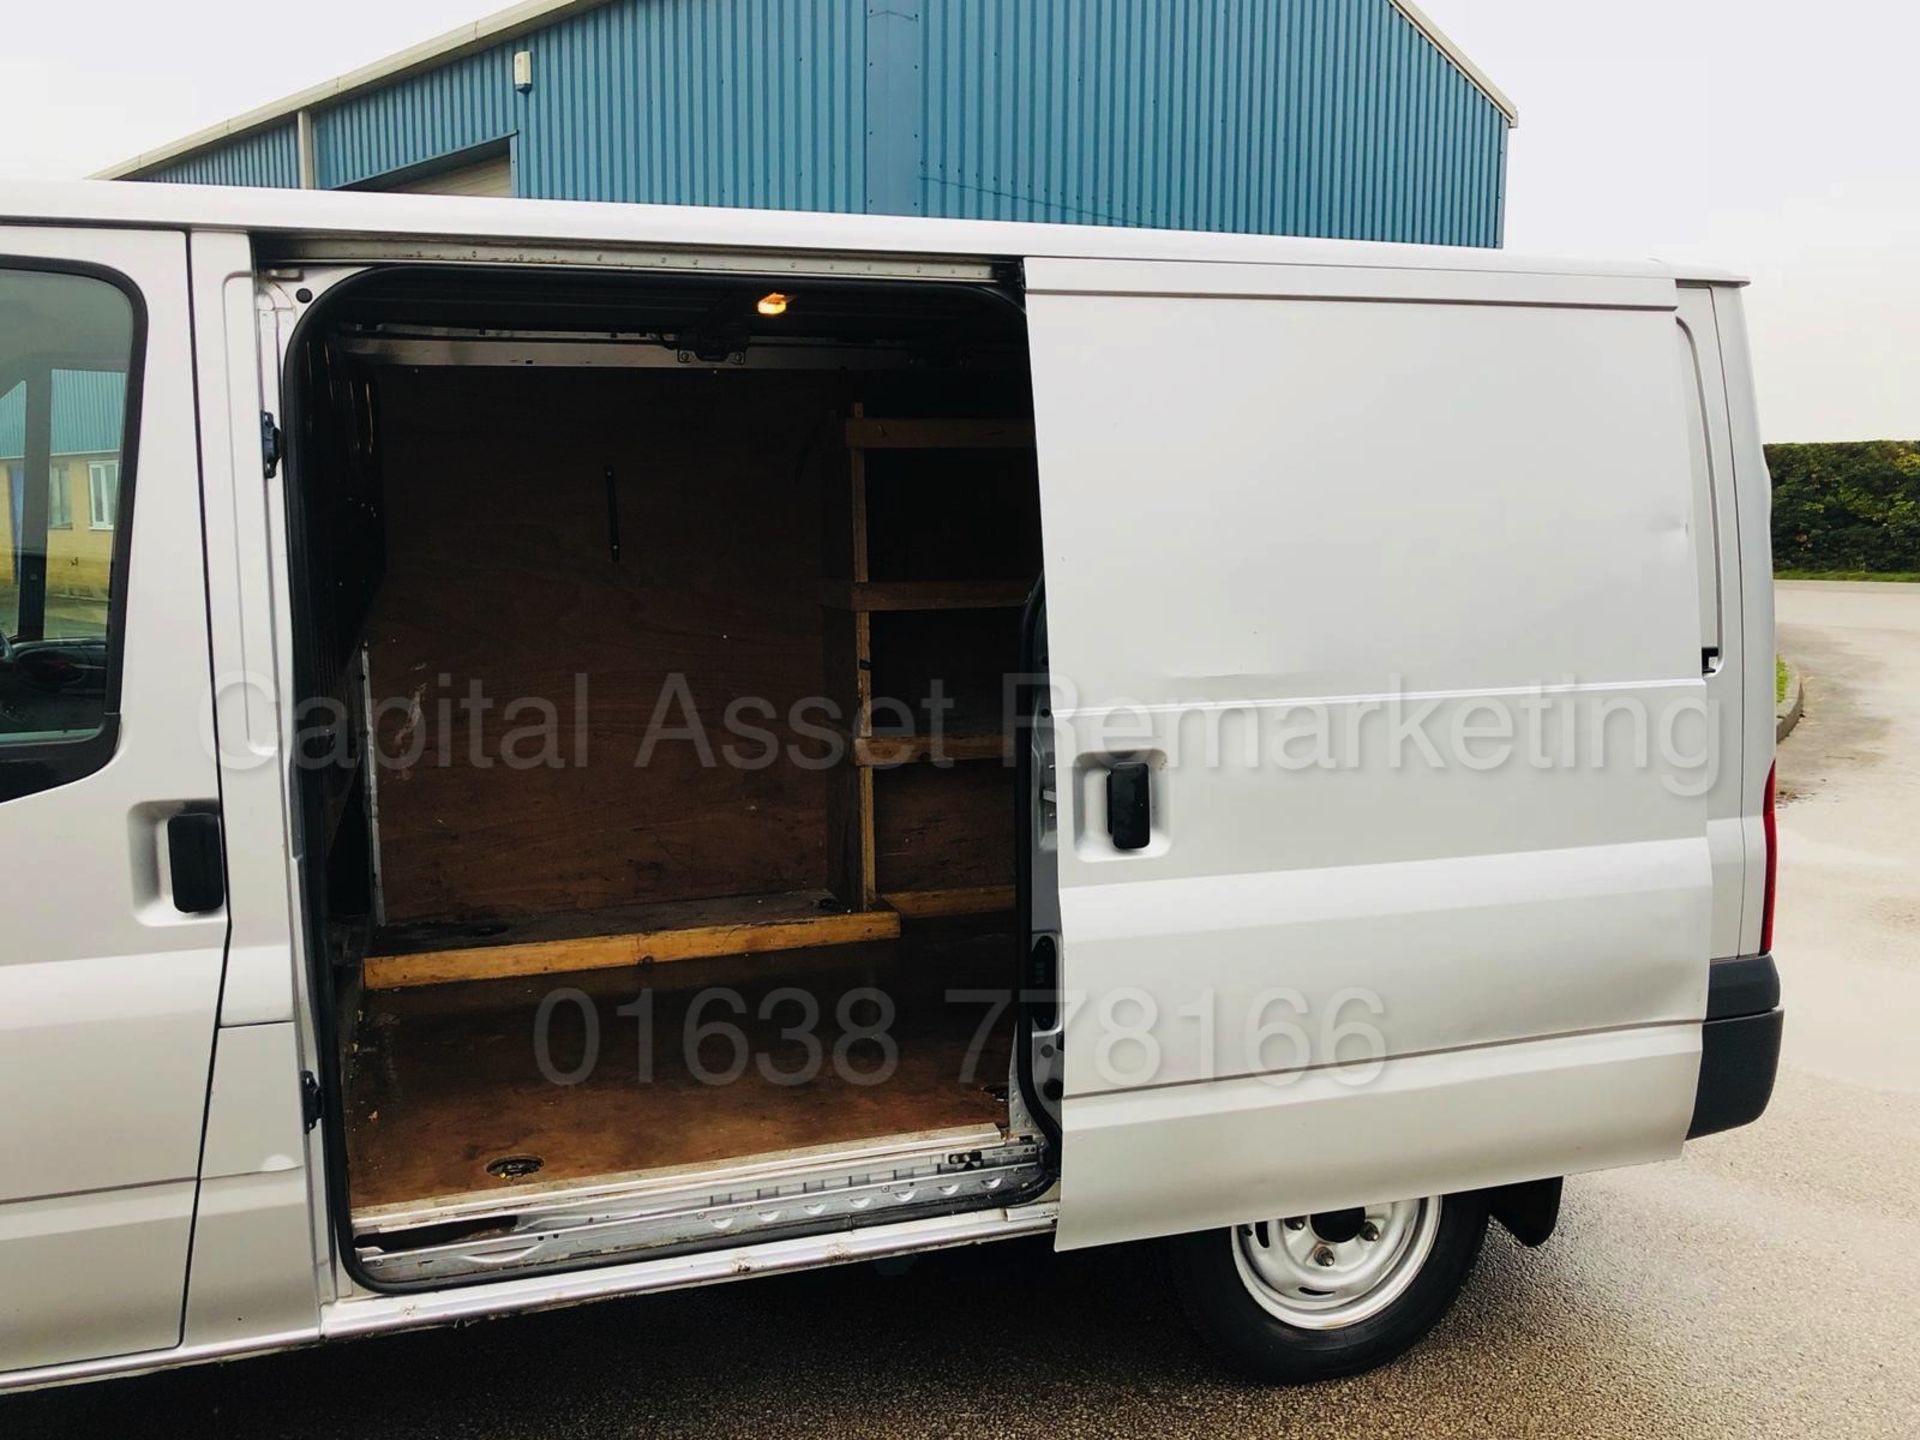 FORD TRANSIT 85 T260S FWD 'SWB' (2011 MODEL) '2.2 TDCI - 85 BHP - 5 SPEED' **ULTRA LOW MILES** - Image 15 of 22